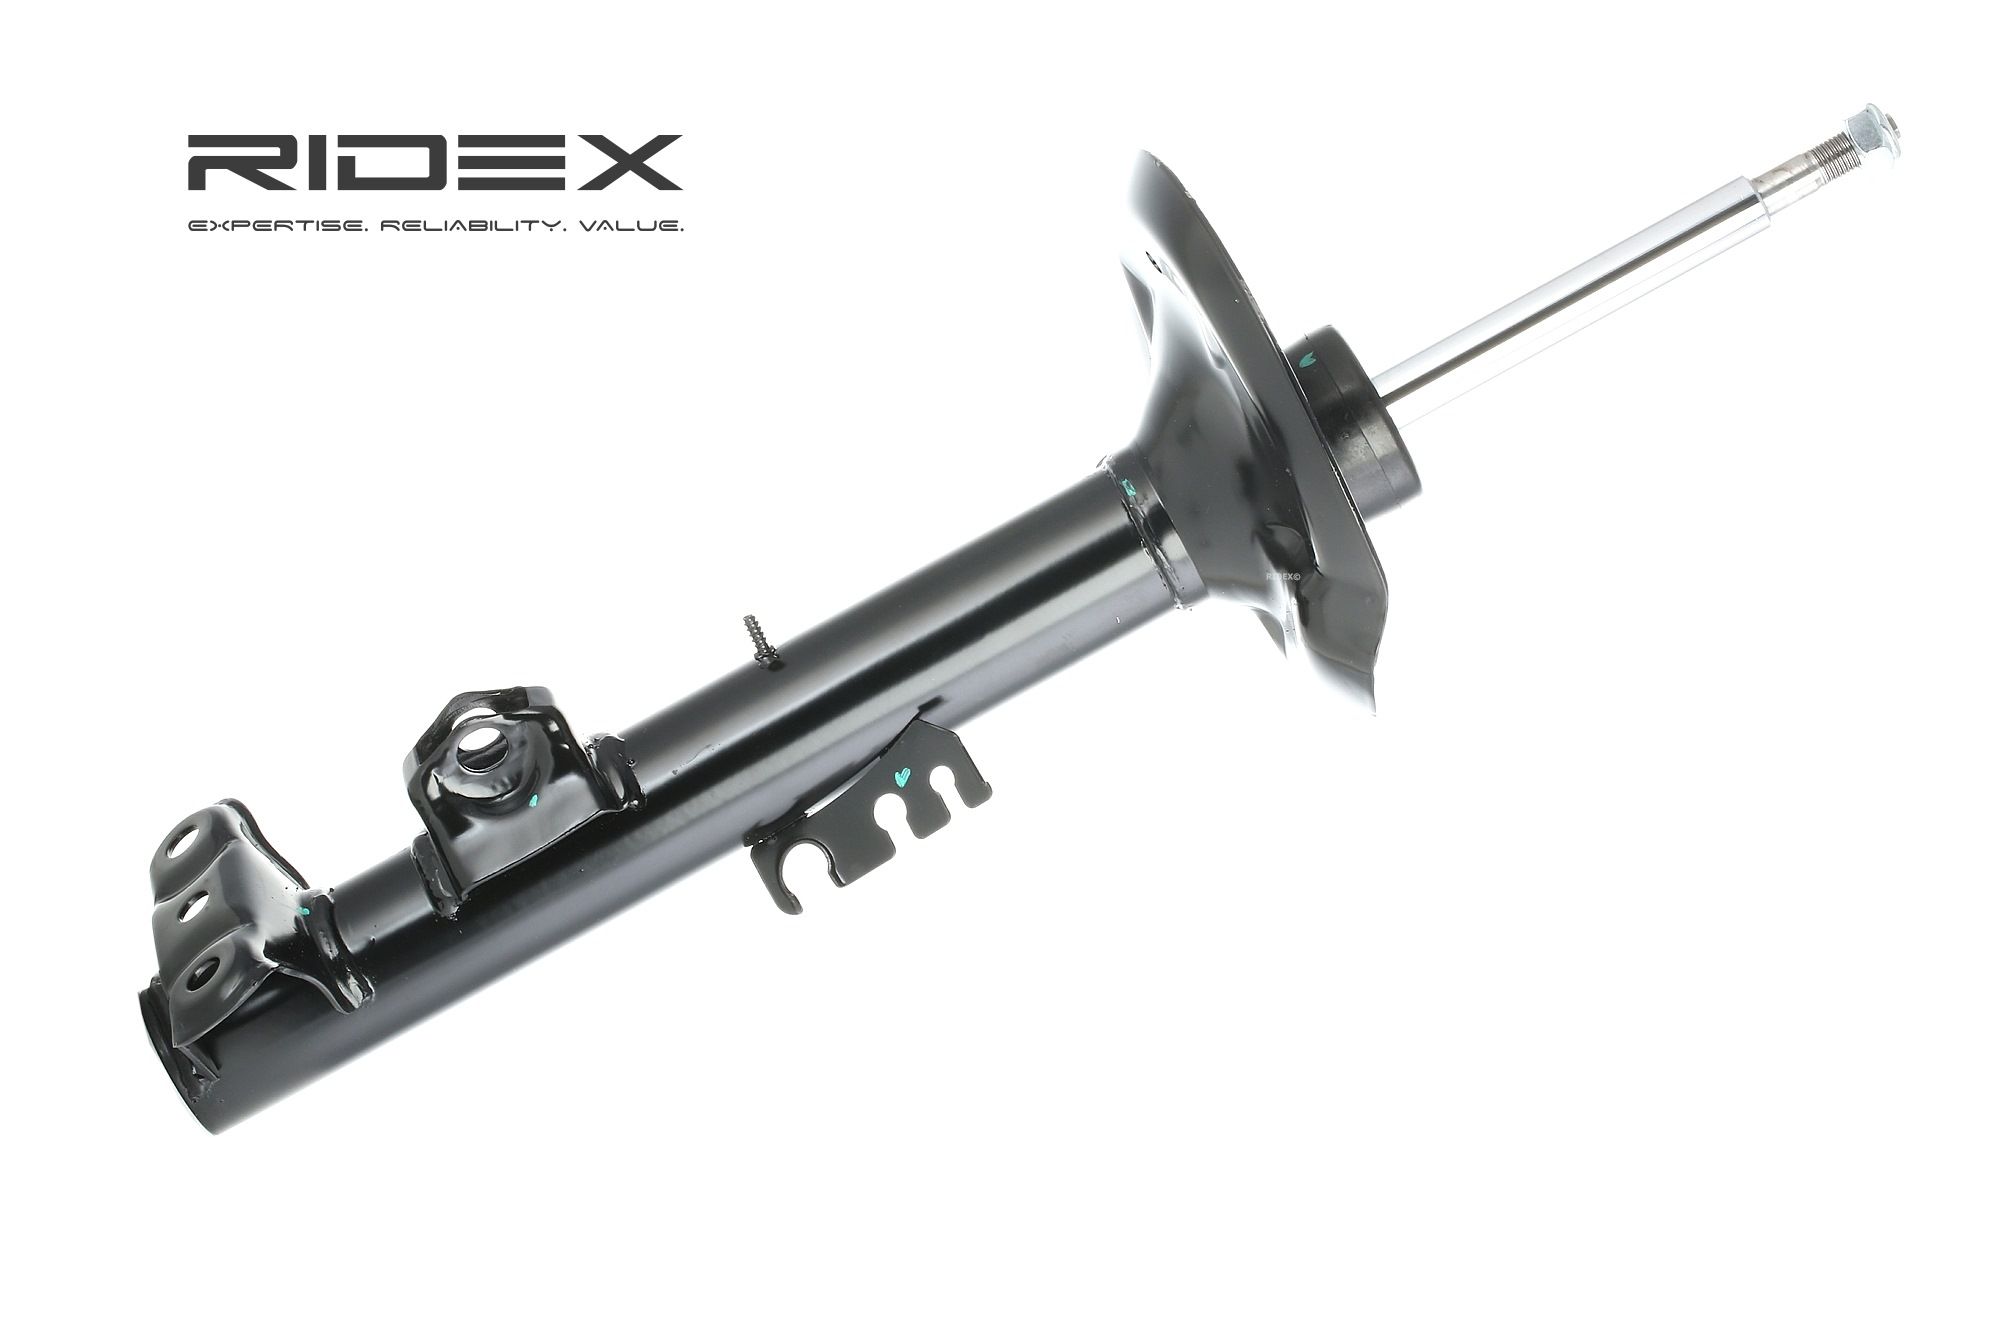 RIDEX 854S0157 Shock absorber Front Axle Left, Gas Pressure, 585x400 mm, Twin-Tube, Suspension Strut, Bottom Plate, Top pin